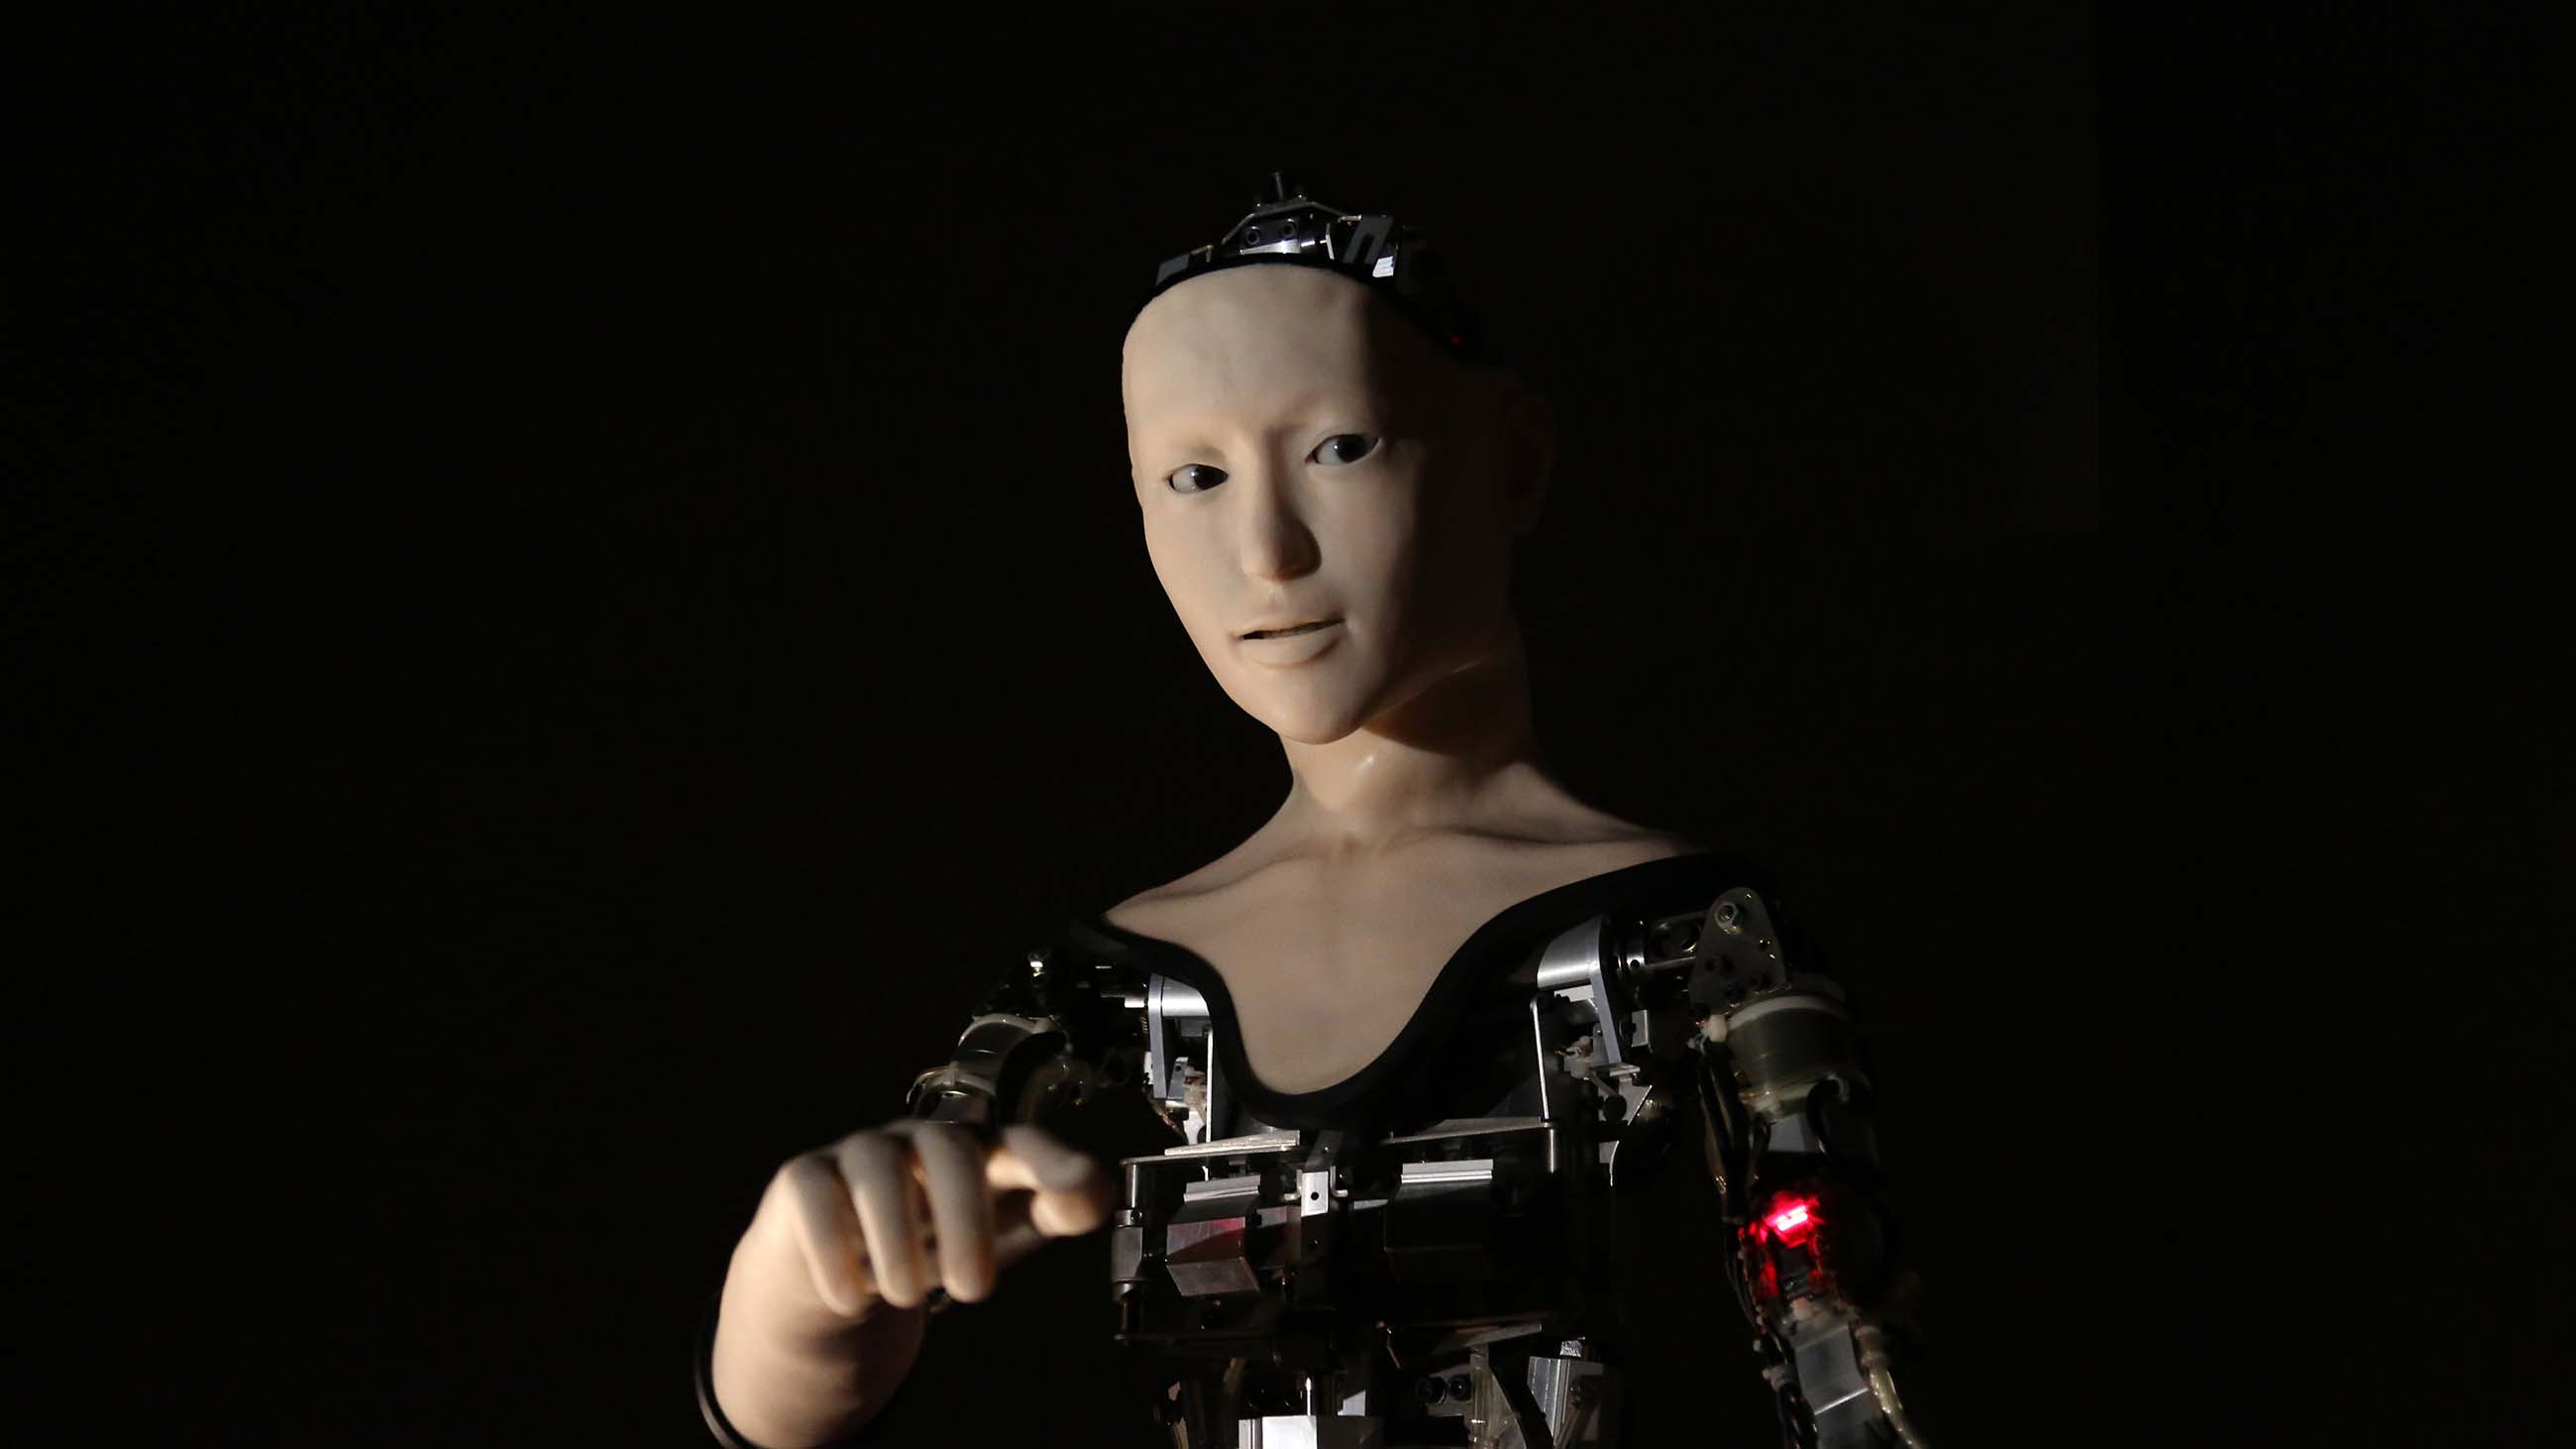 Artificially intelligent robots are increasingly able to produce lifelike movements, facial expressions, and speech.